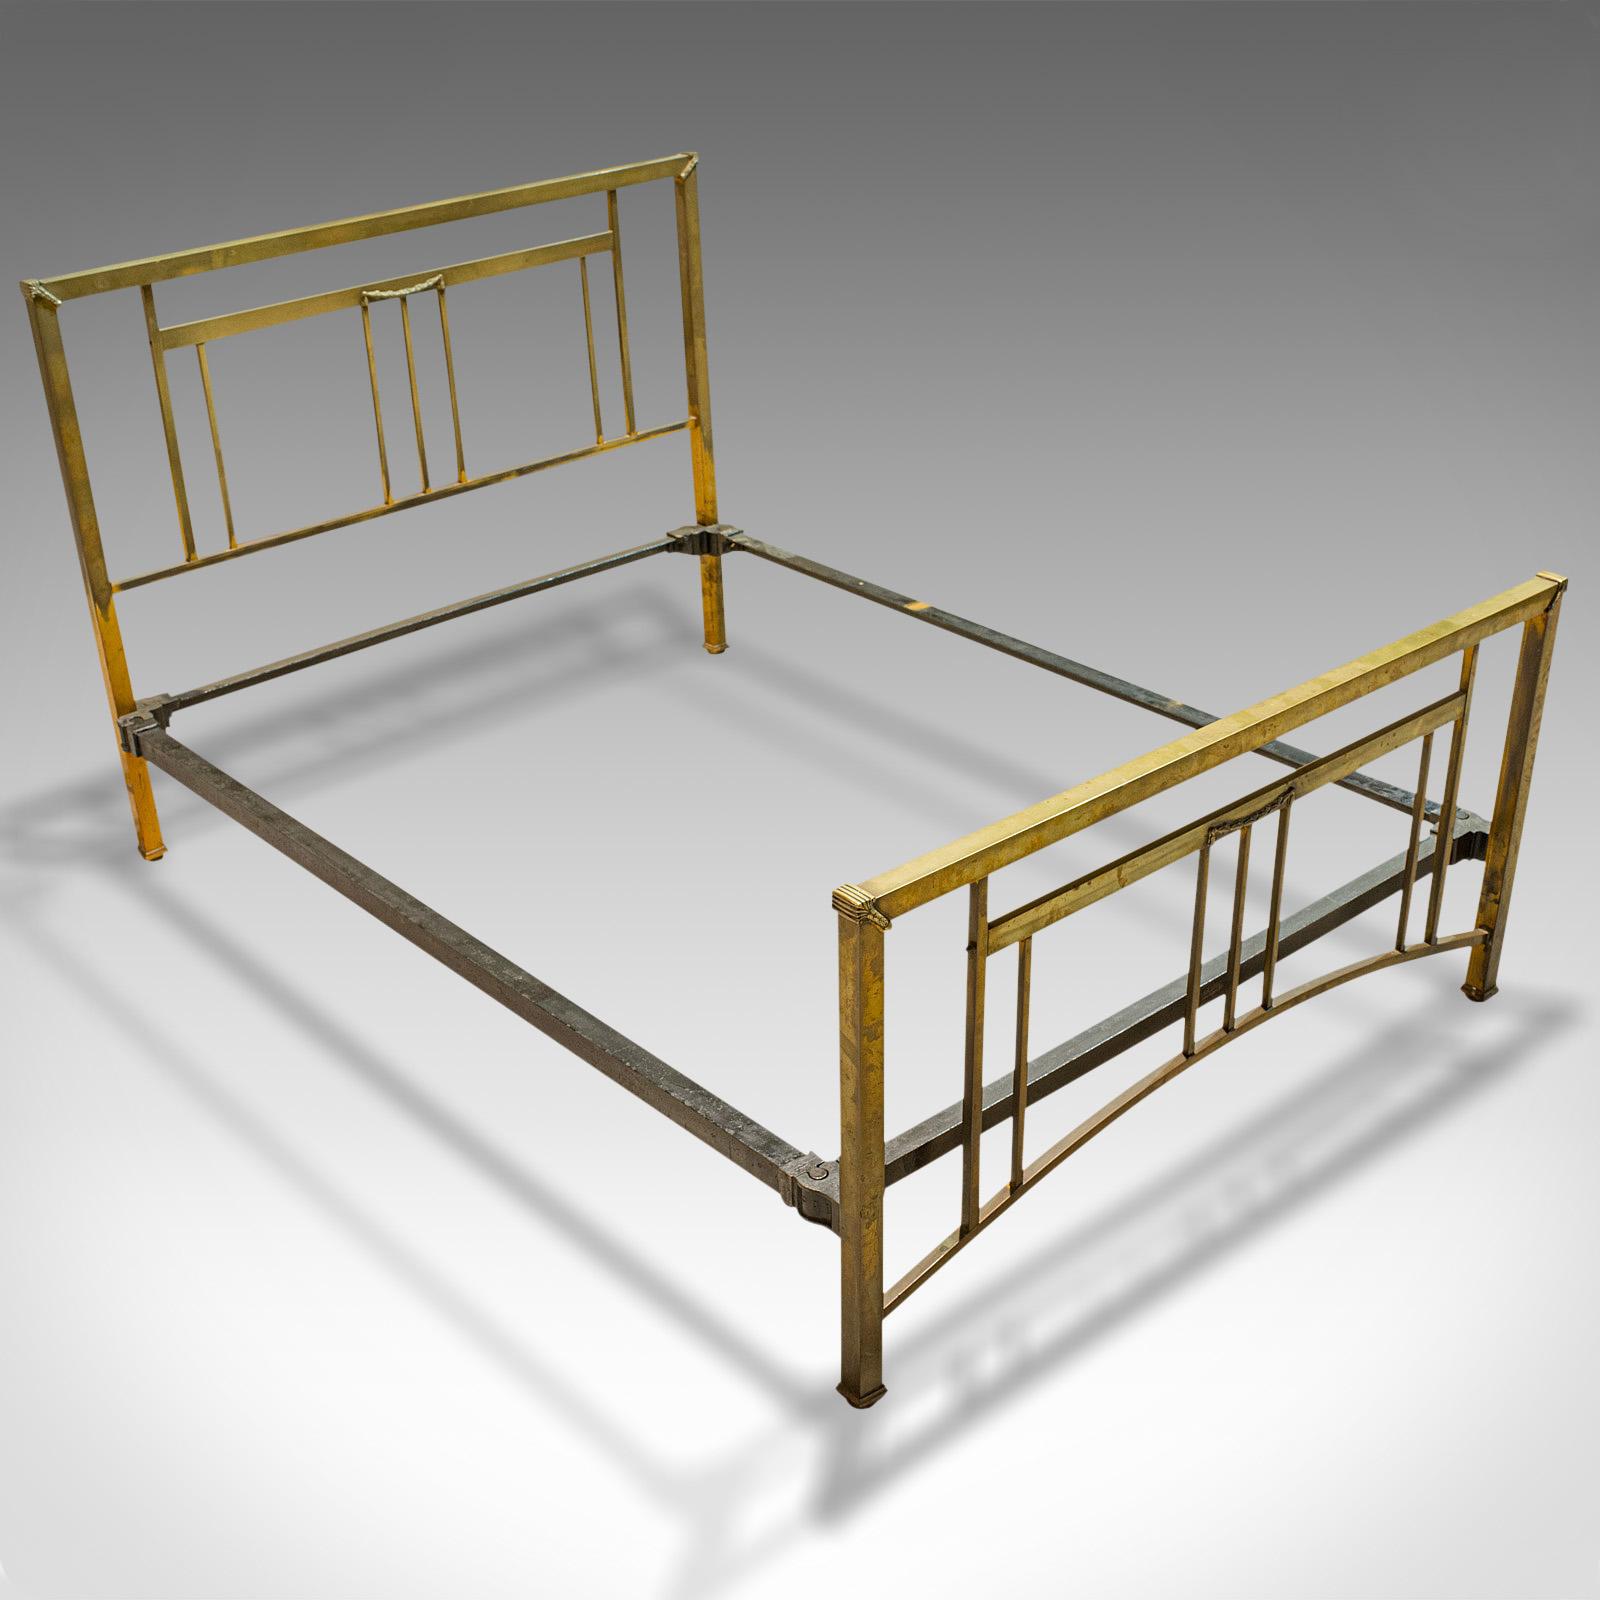 Antique Bed Frame, English, Brass, Iron, Double Bedstead, Victorian, circa 1880 1